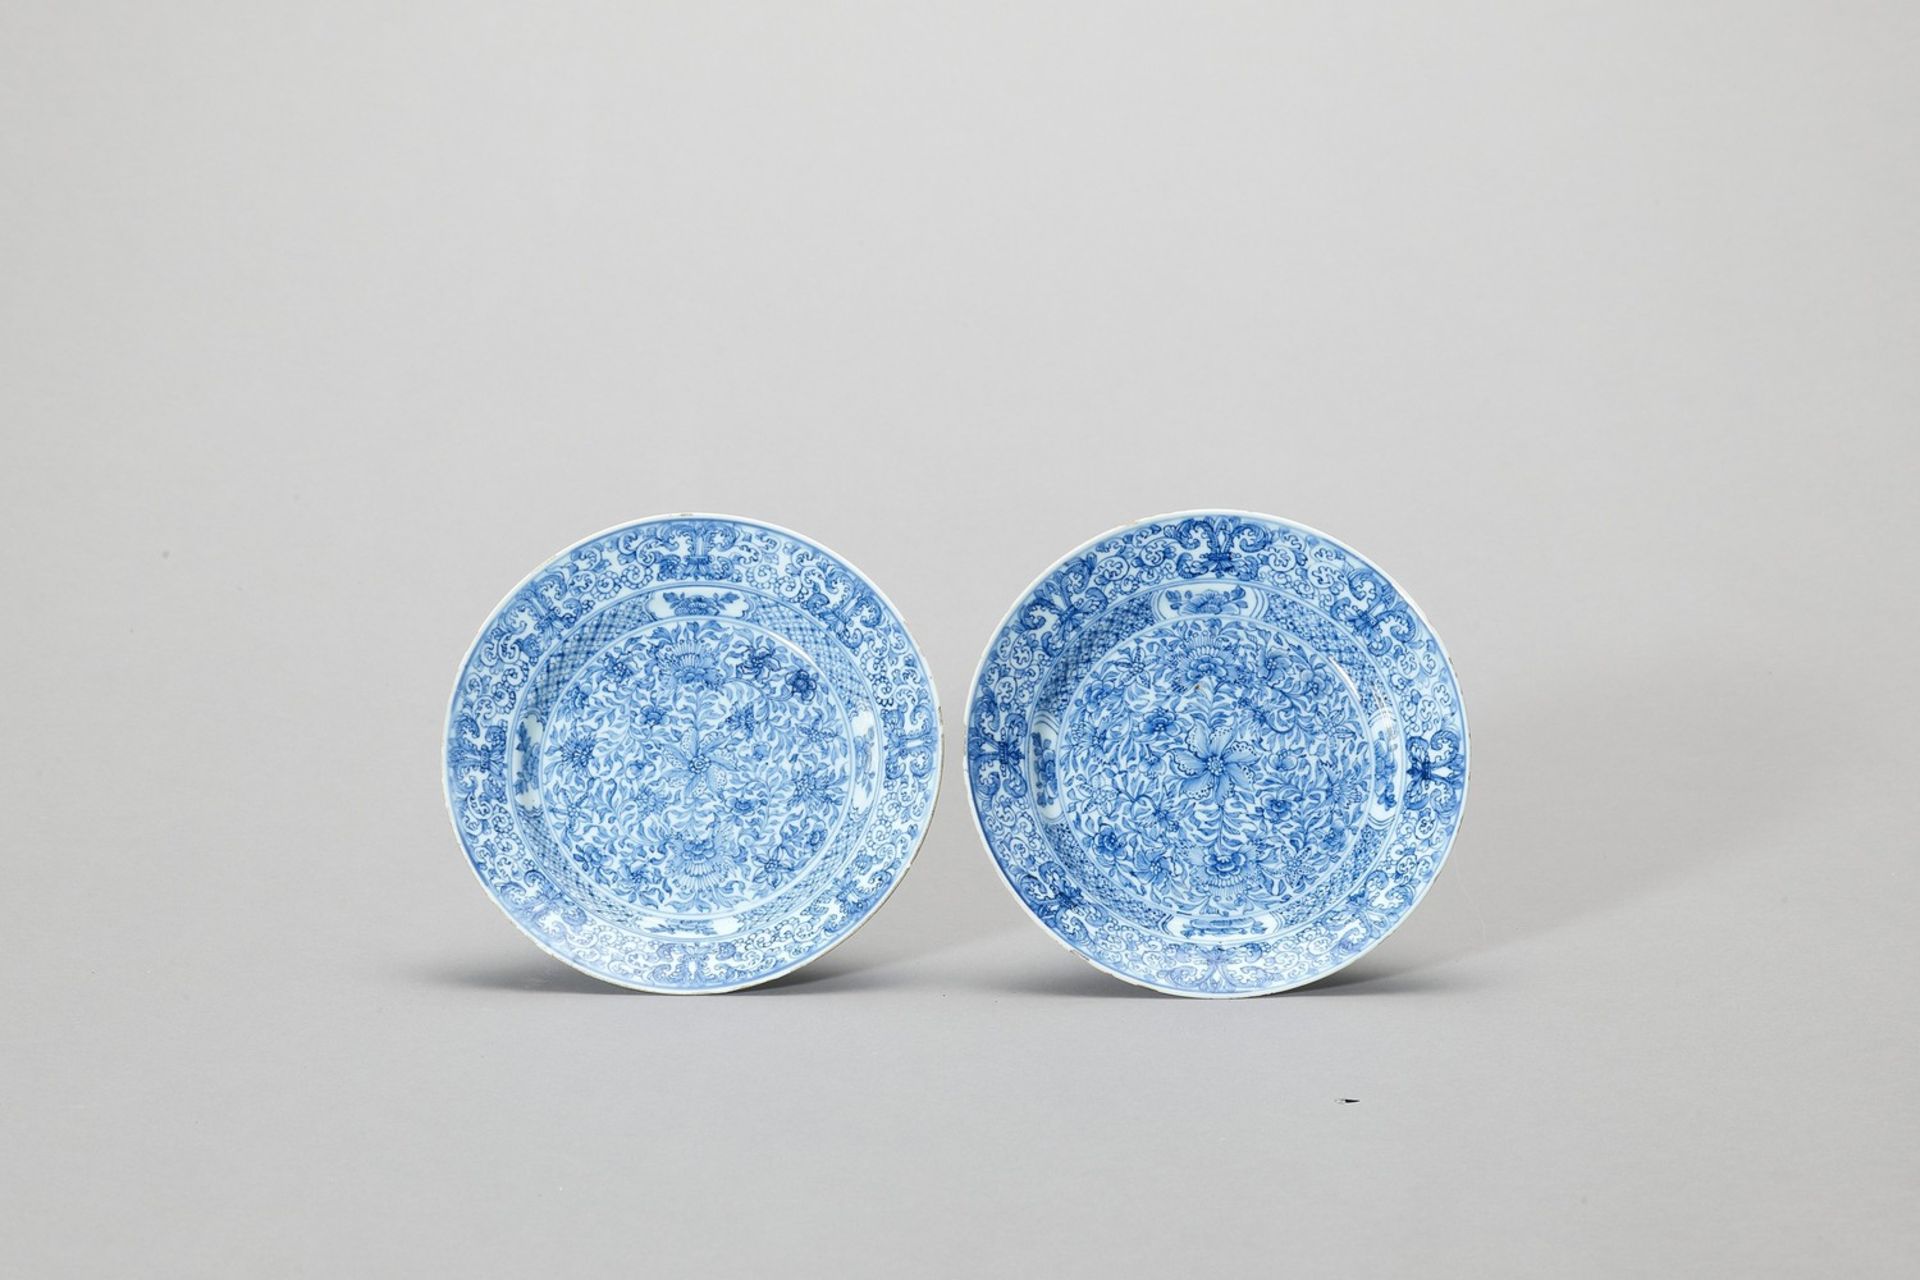 A PAIR OF ‘FLORAL SCROLL’ BLUE AND WHITE PORCELAIN DISHES